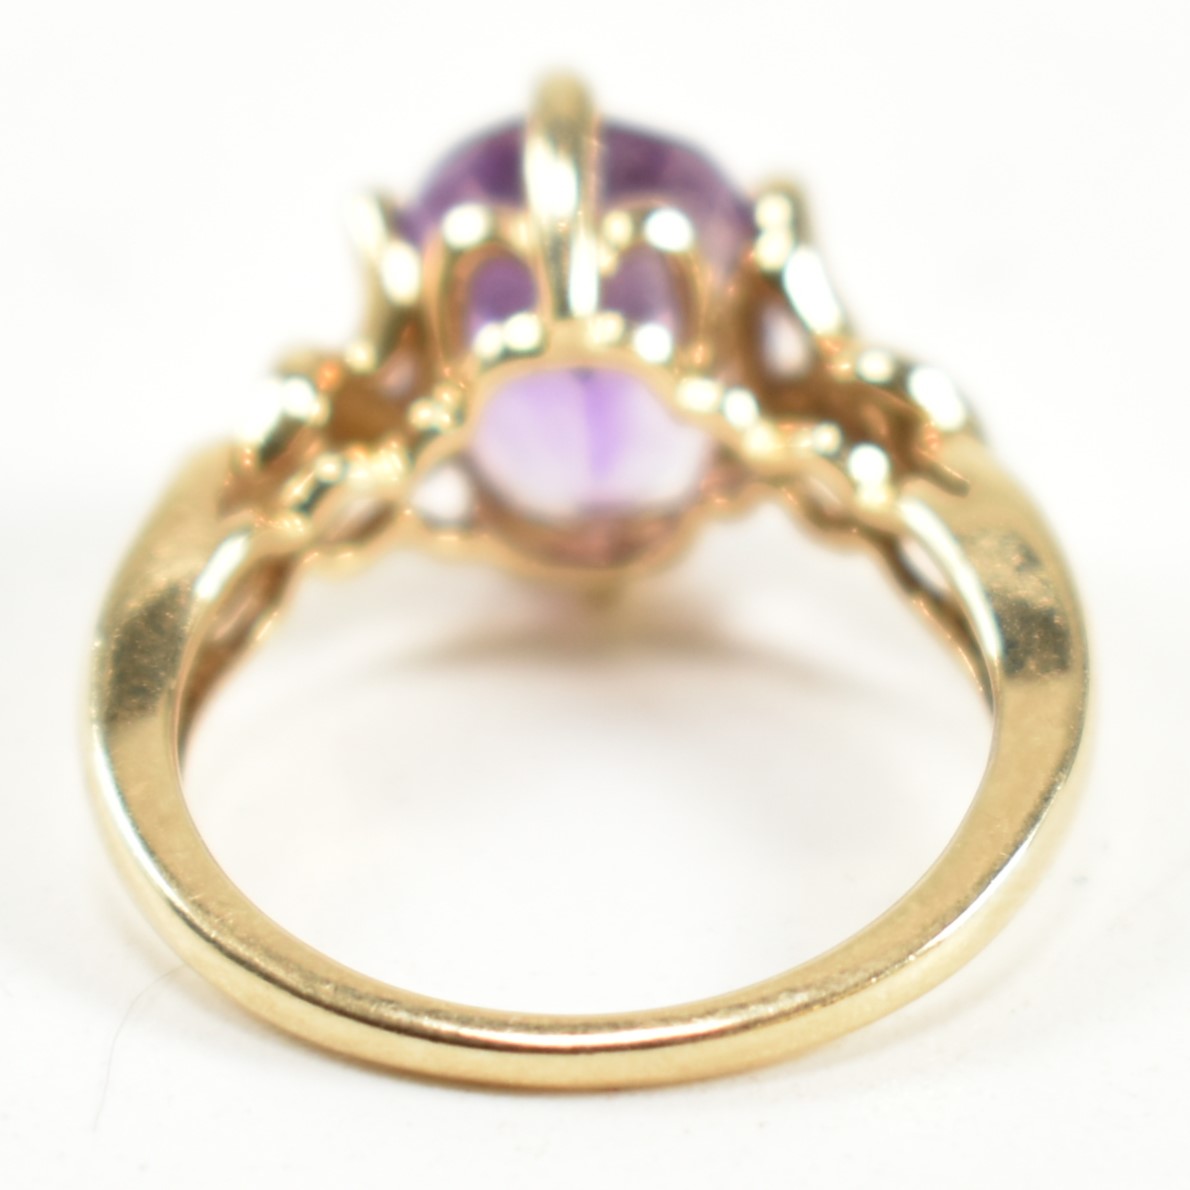 HALLMARKED 9CT GOLD & AMETHYST RING - Image 4 of 9